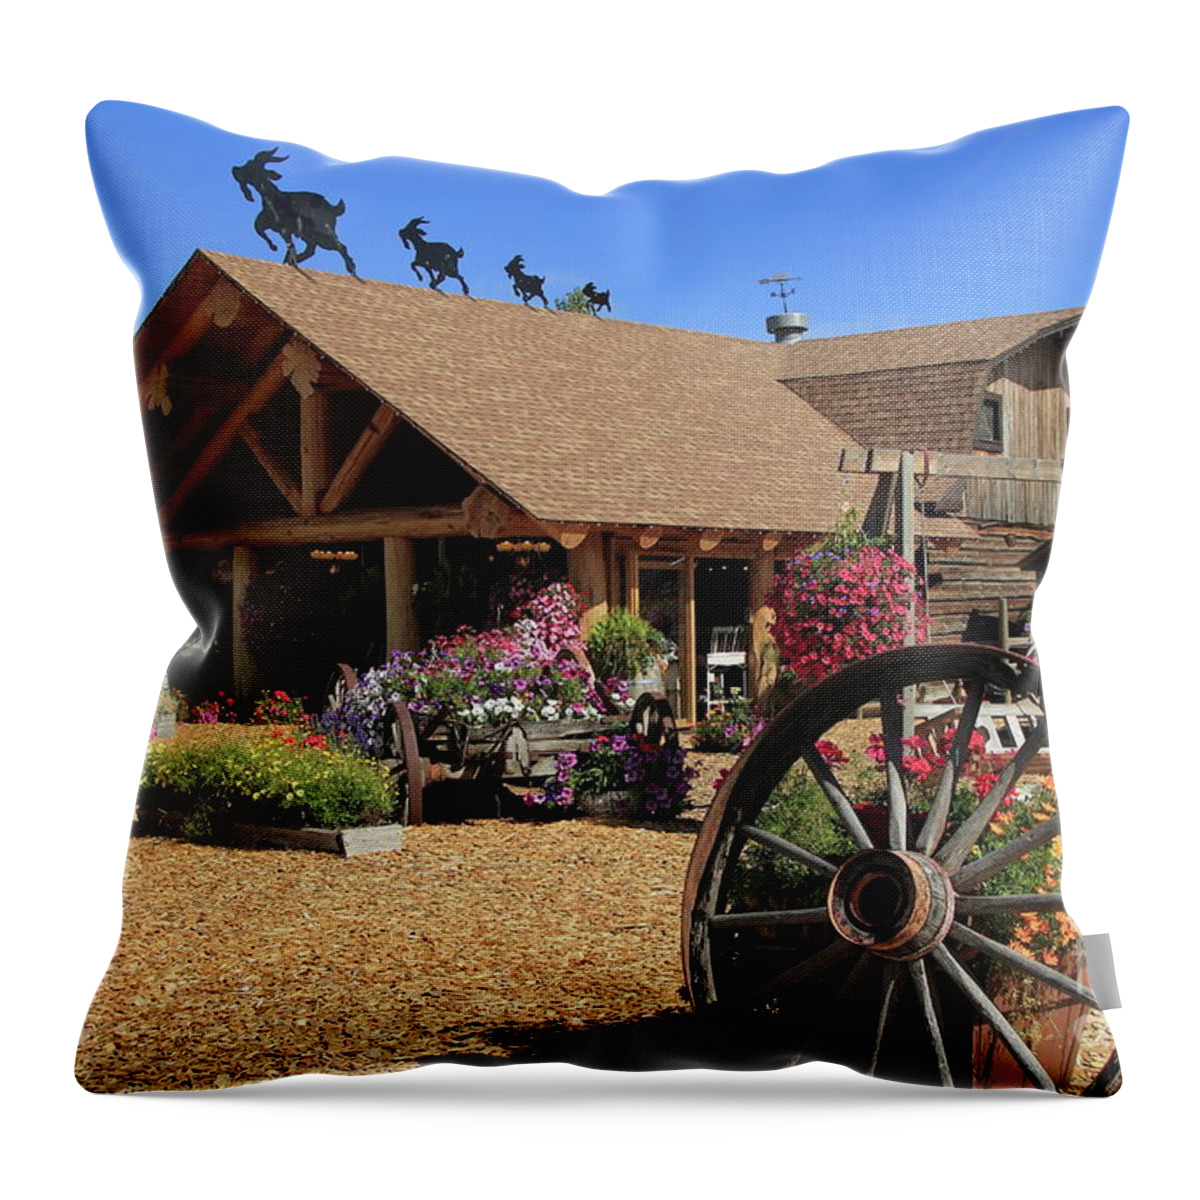 Log Barn Throw Pillow featuring the photograph The Log Barn by Eva Lechner